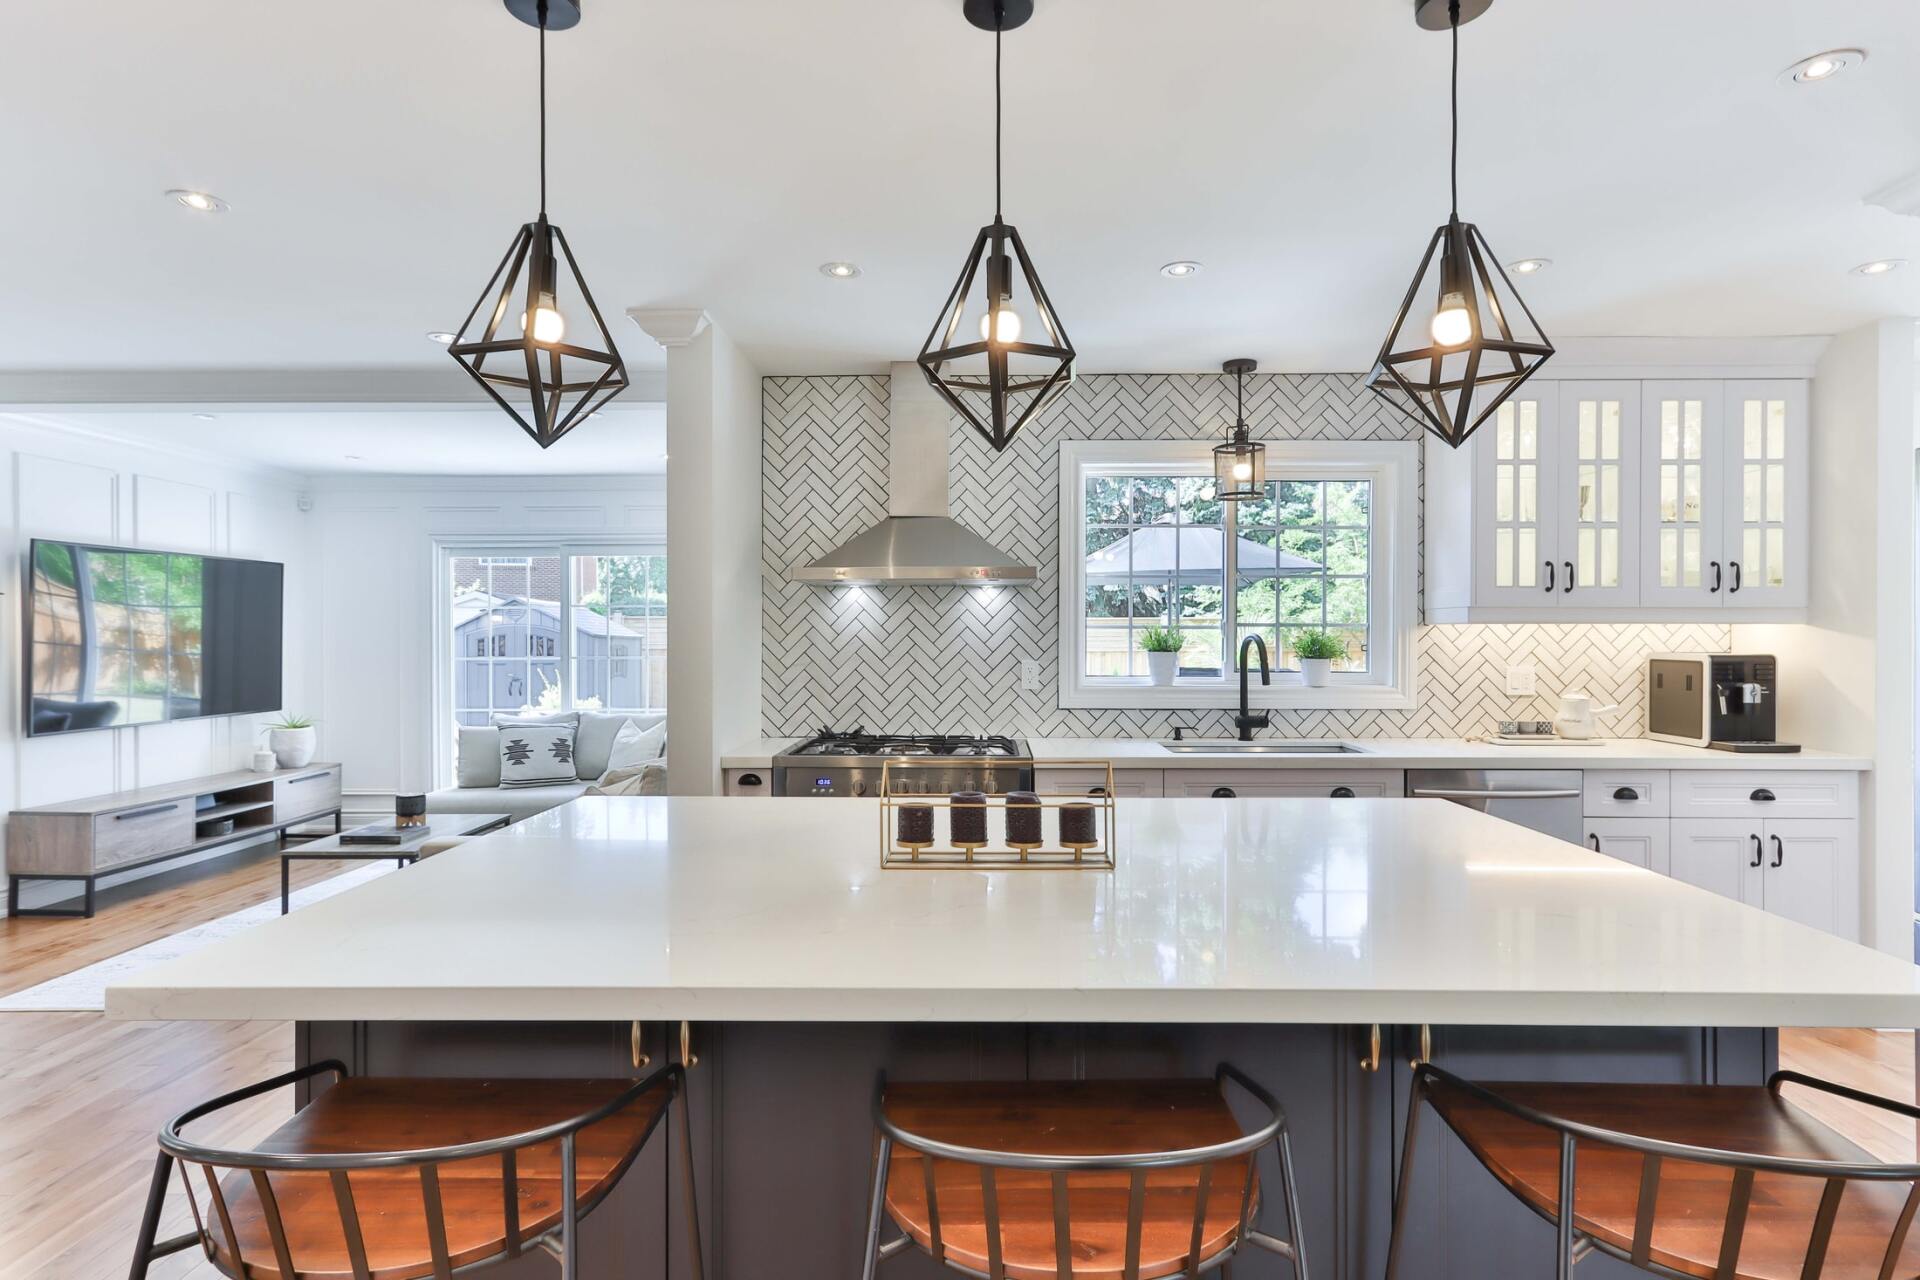 A modern kitchen with herringbone subway tile, diamond pendant lights, quartz counters, and white and grey cabinets